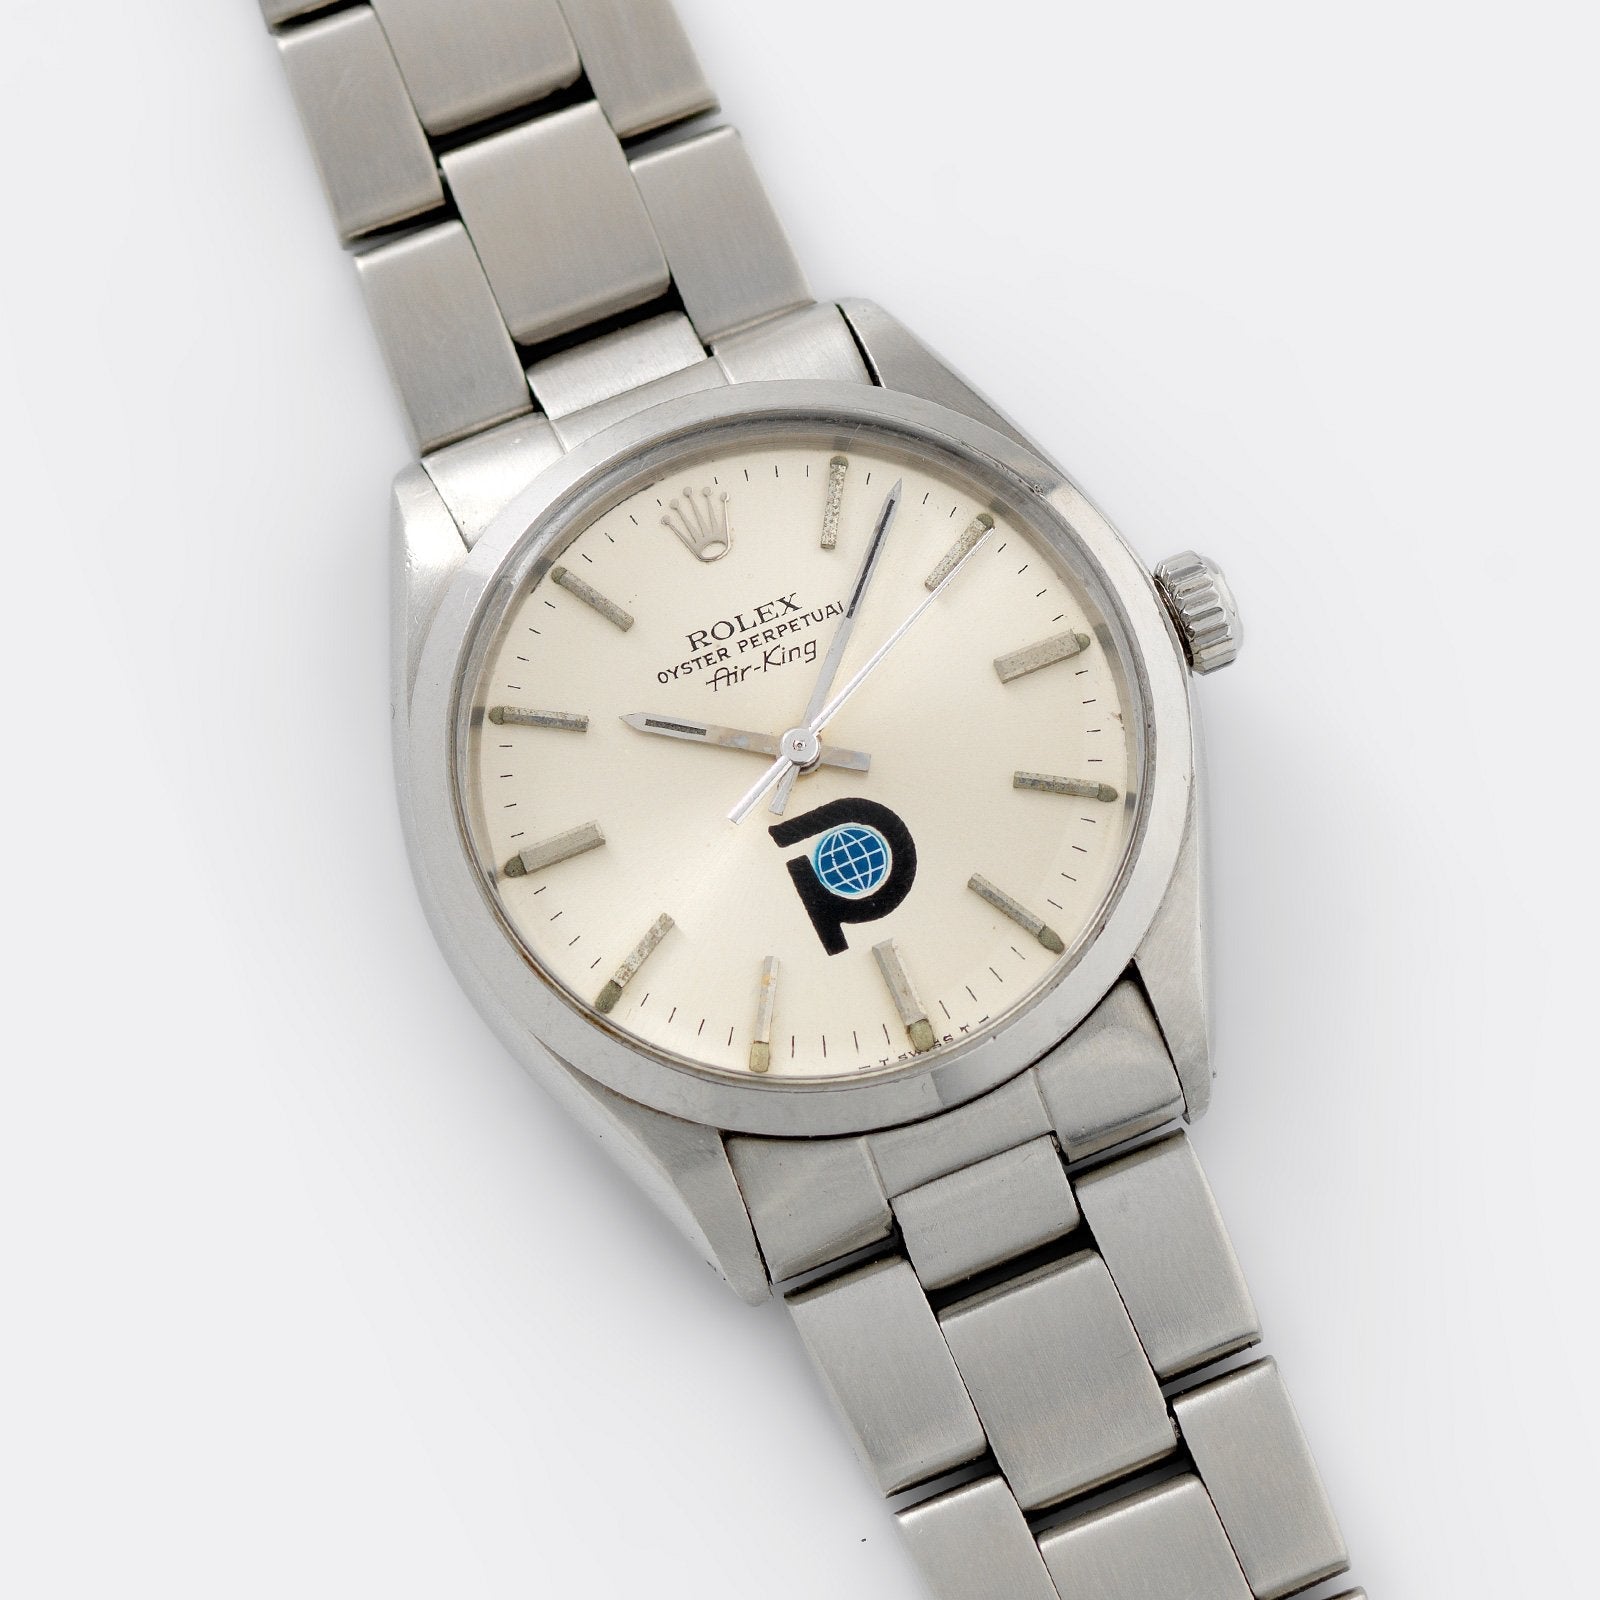 Rolex Air King Ref 5500 Pool Intairdrill Dial